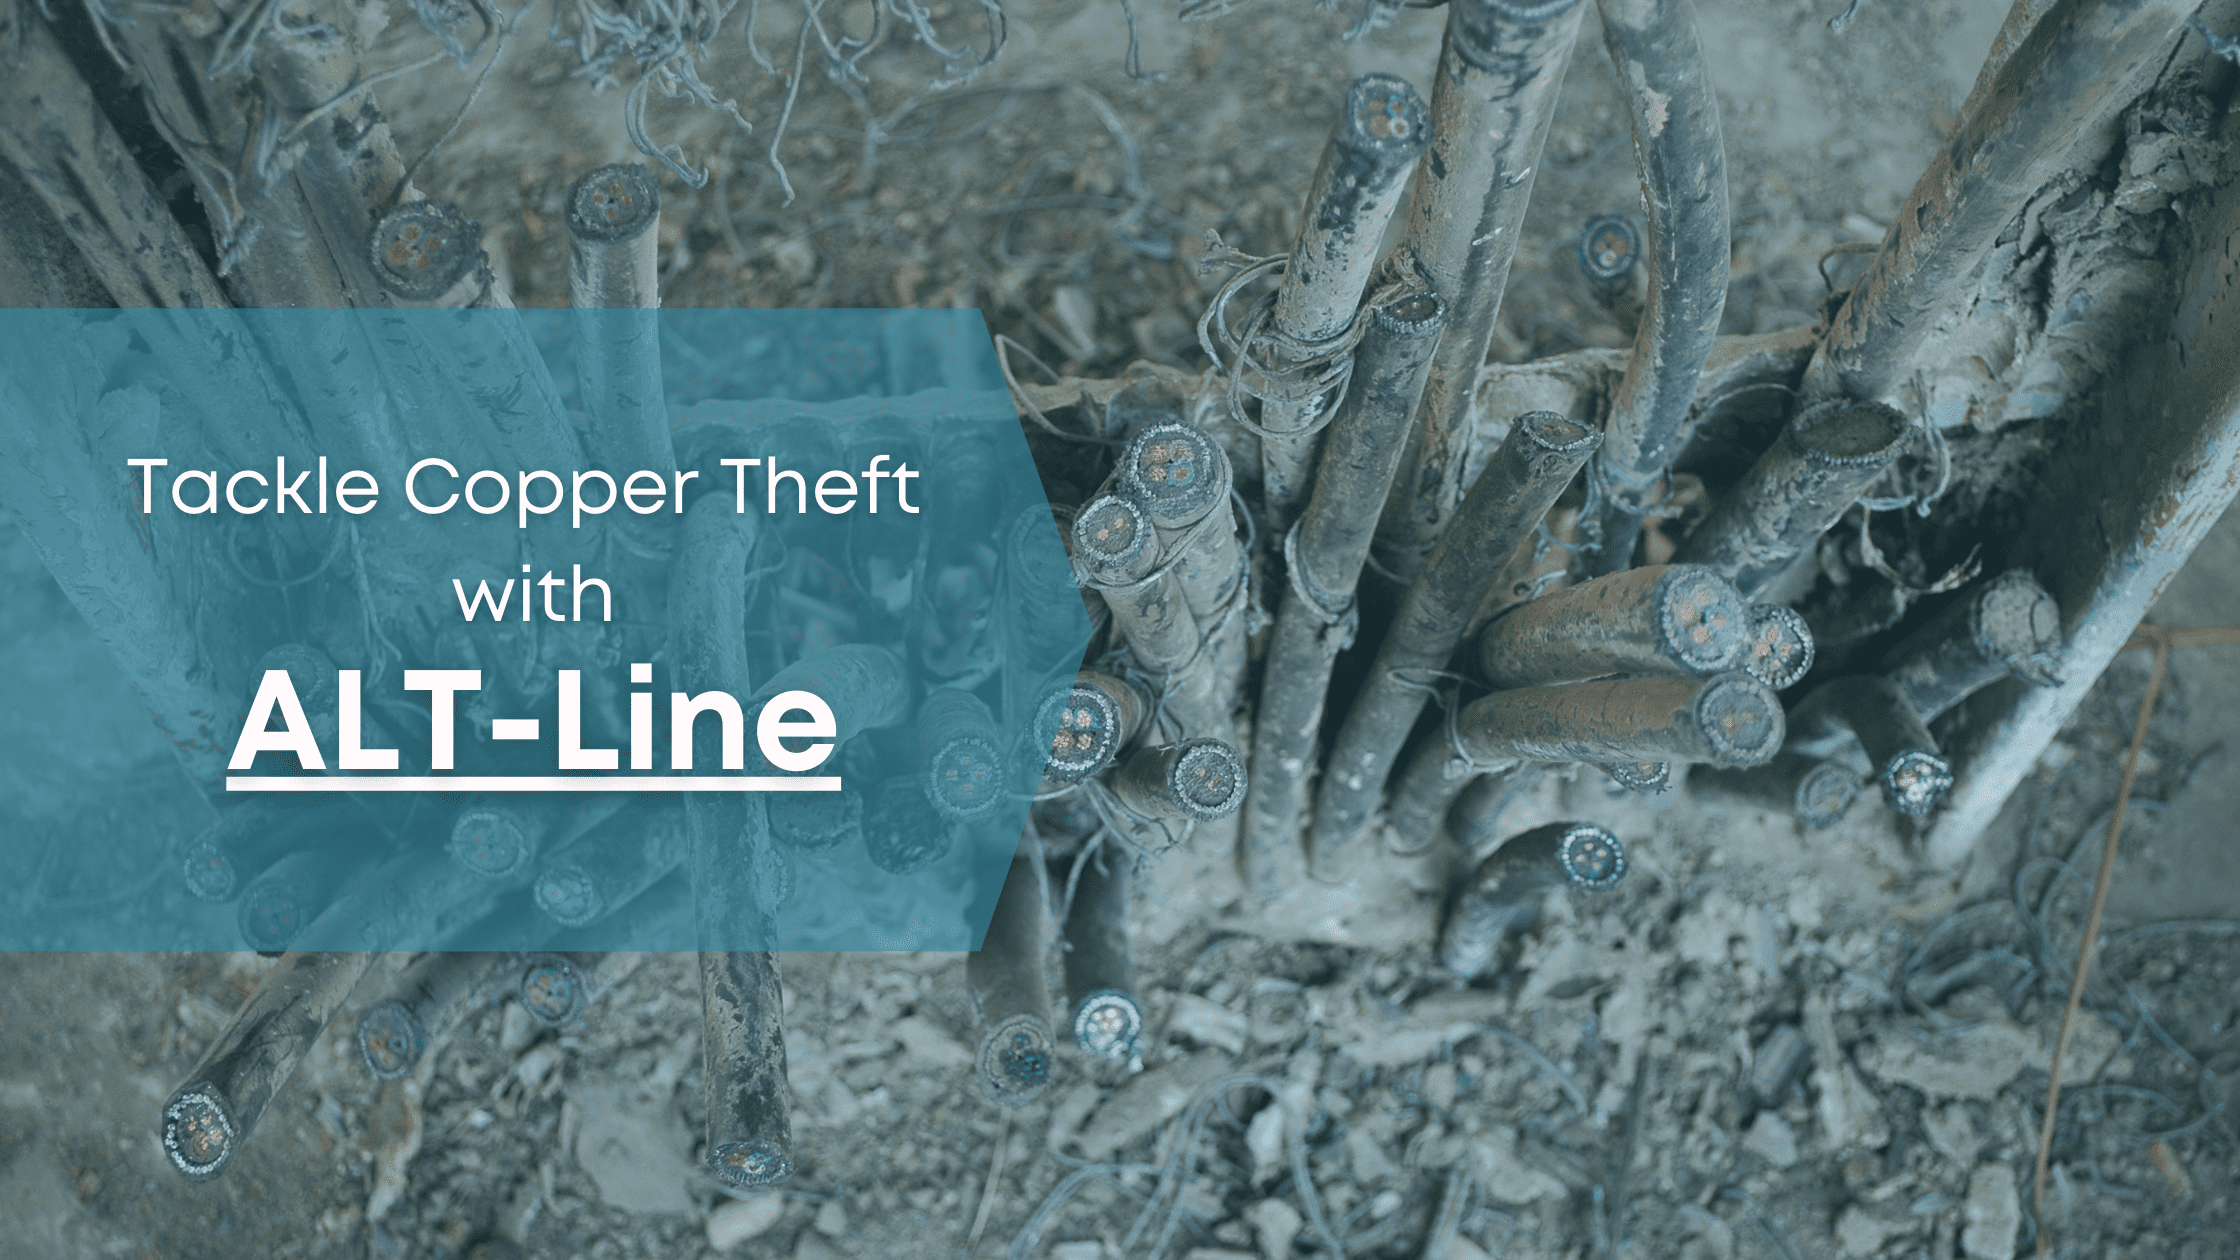 Tackle HVAC copper theft with Alt-Line